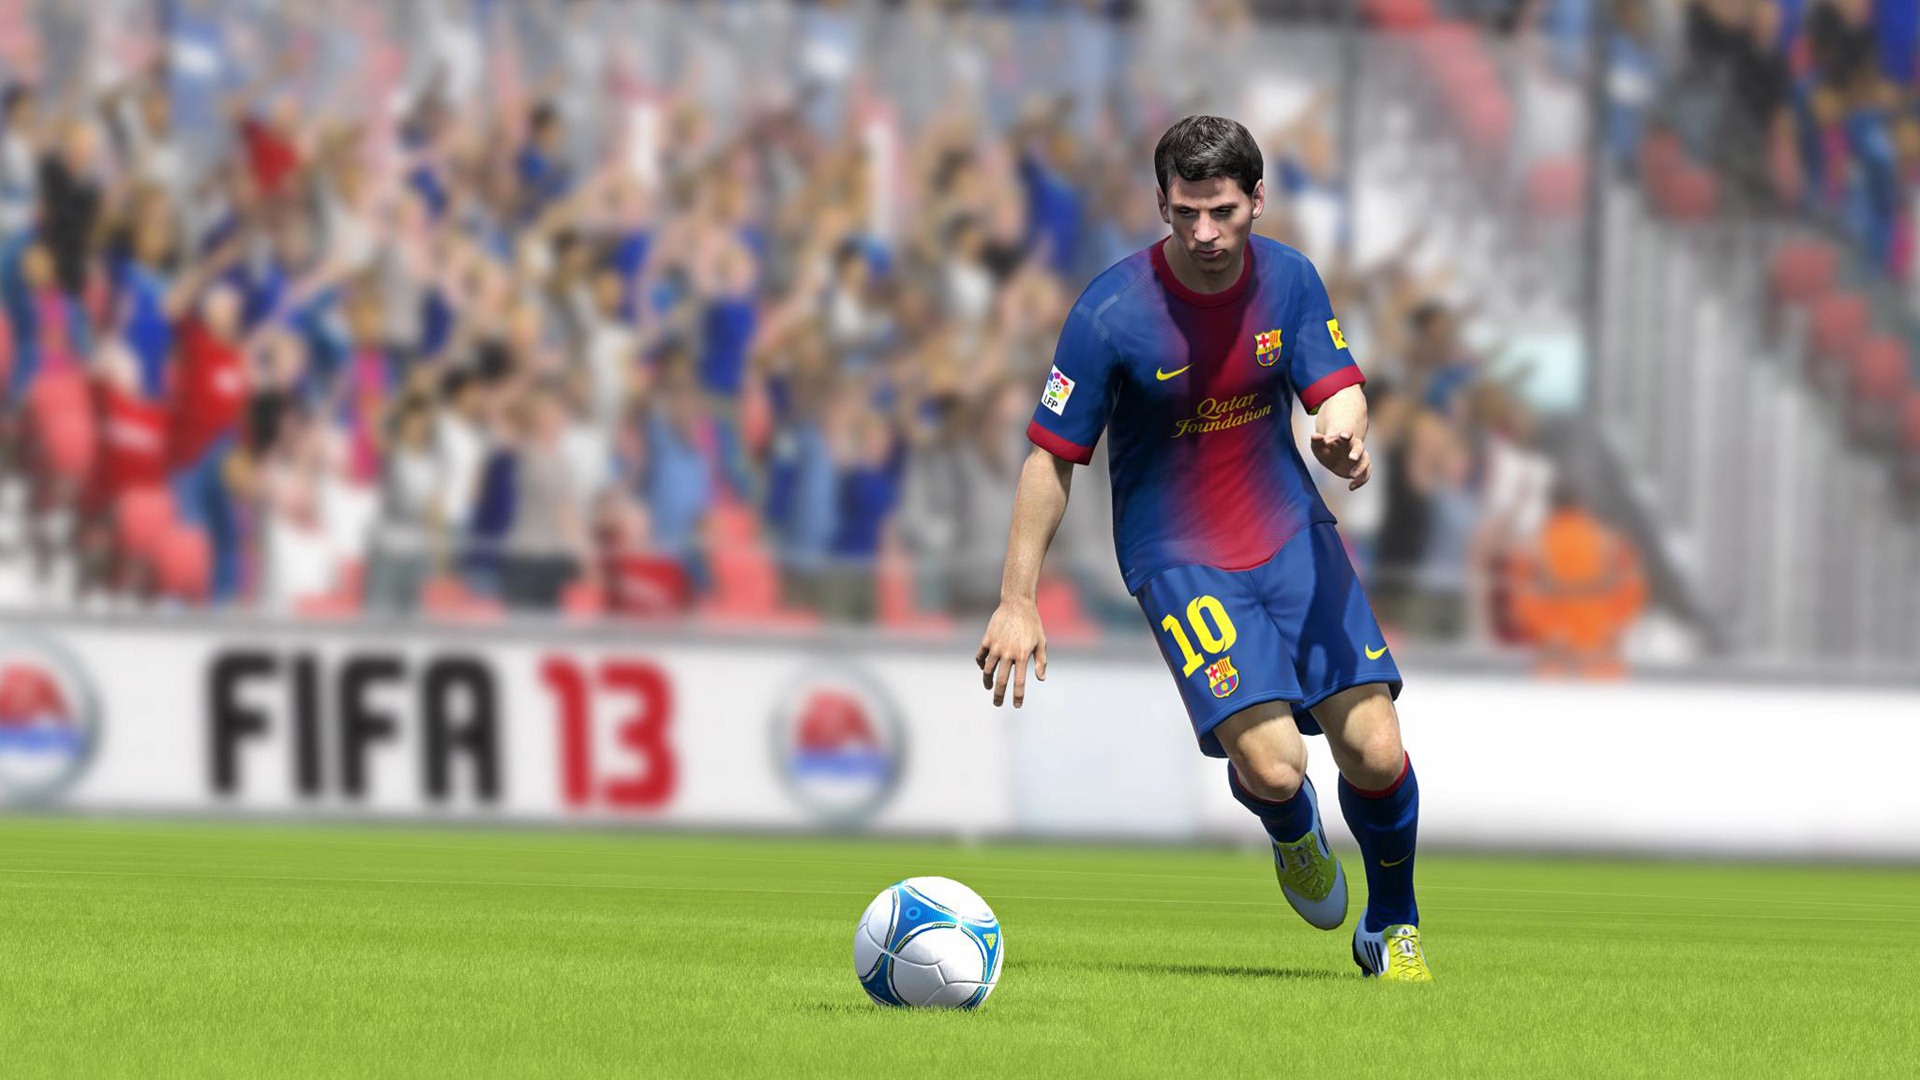 FIFA 13 game HD wallpapers #7 - 1920x1080